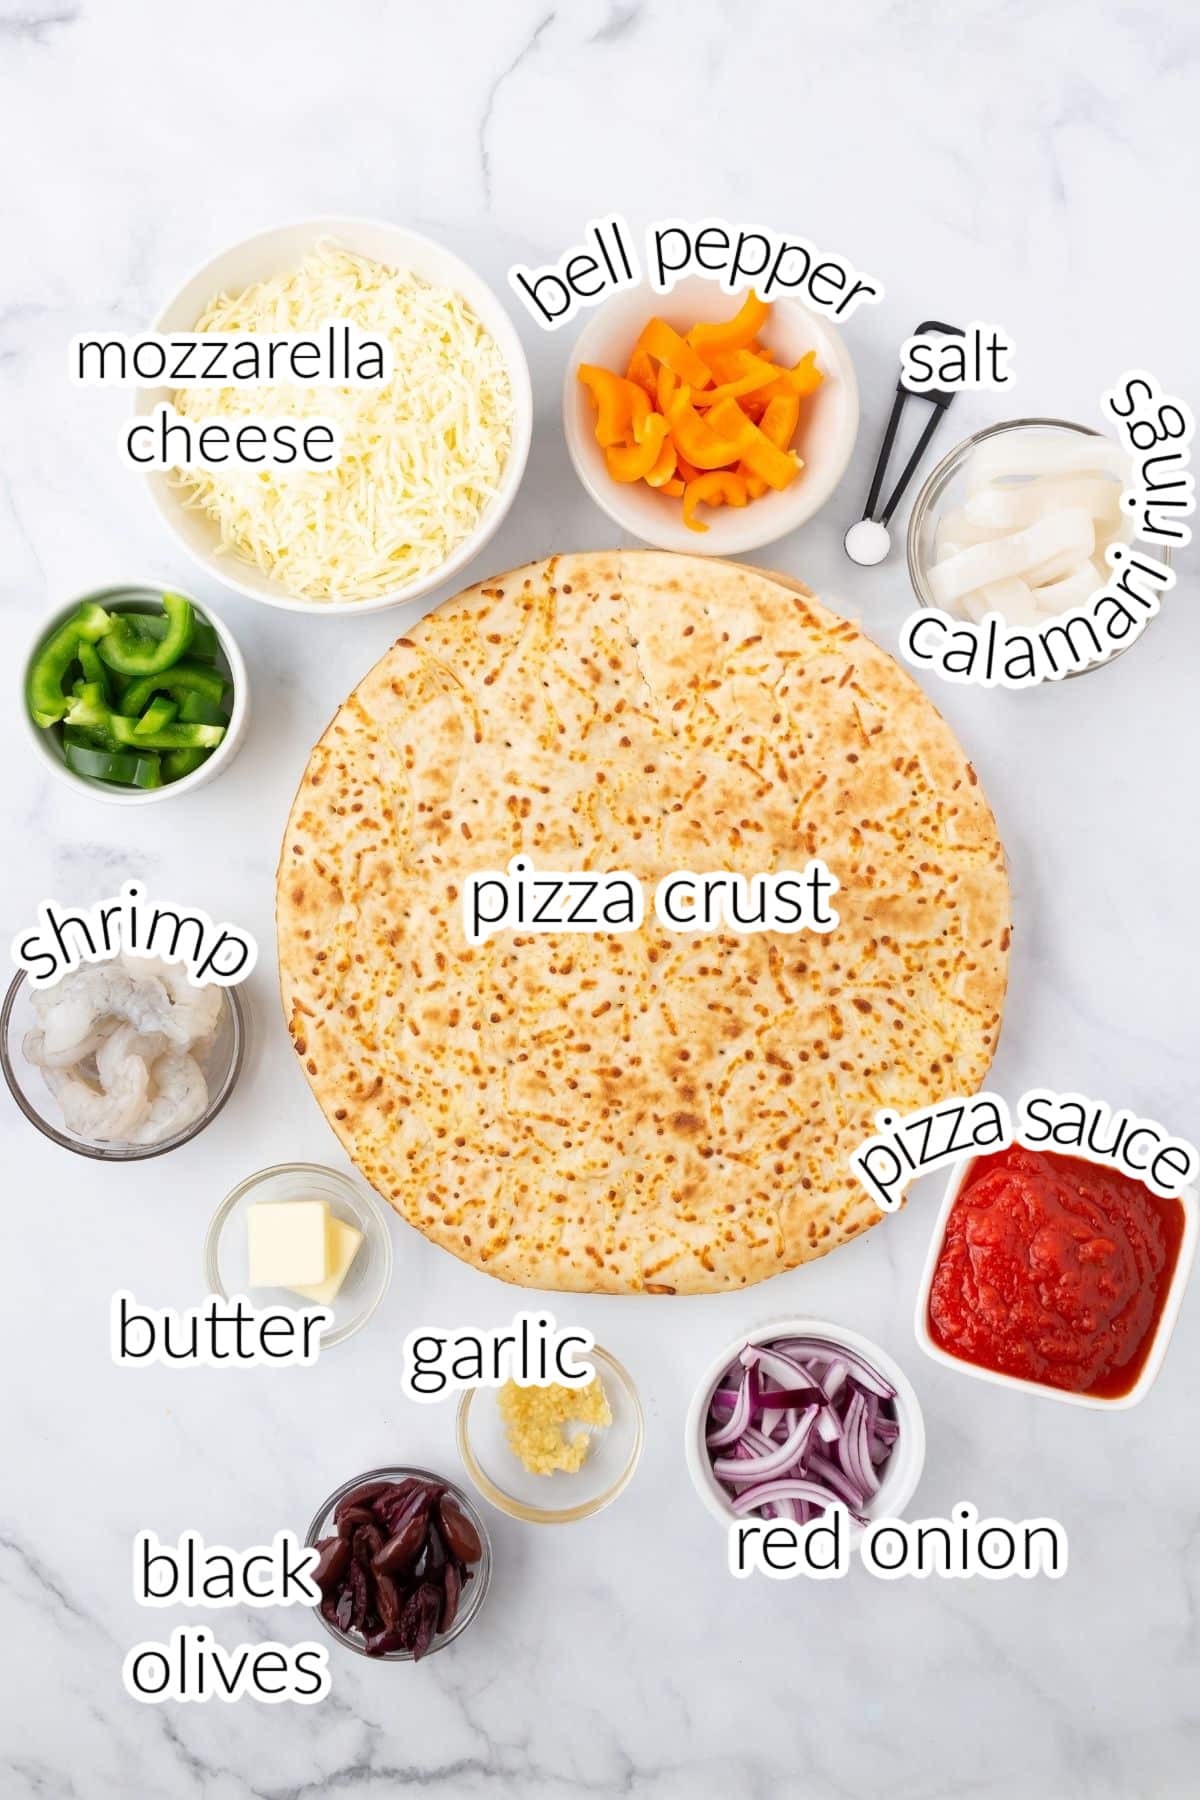 Seafood pizza ingredients on a marble surface.